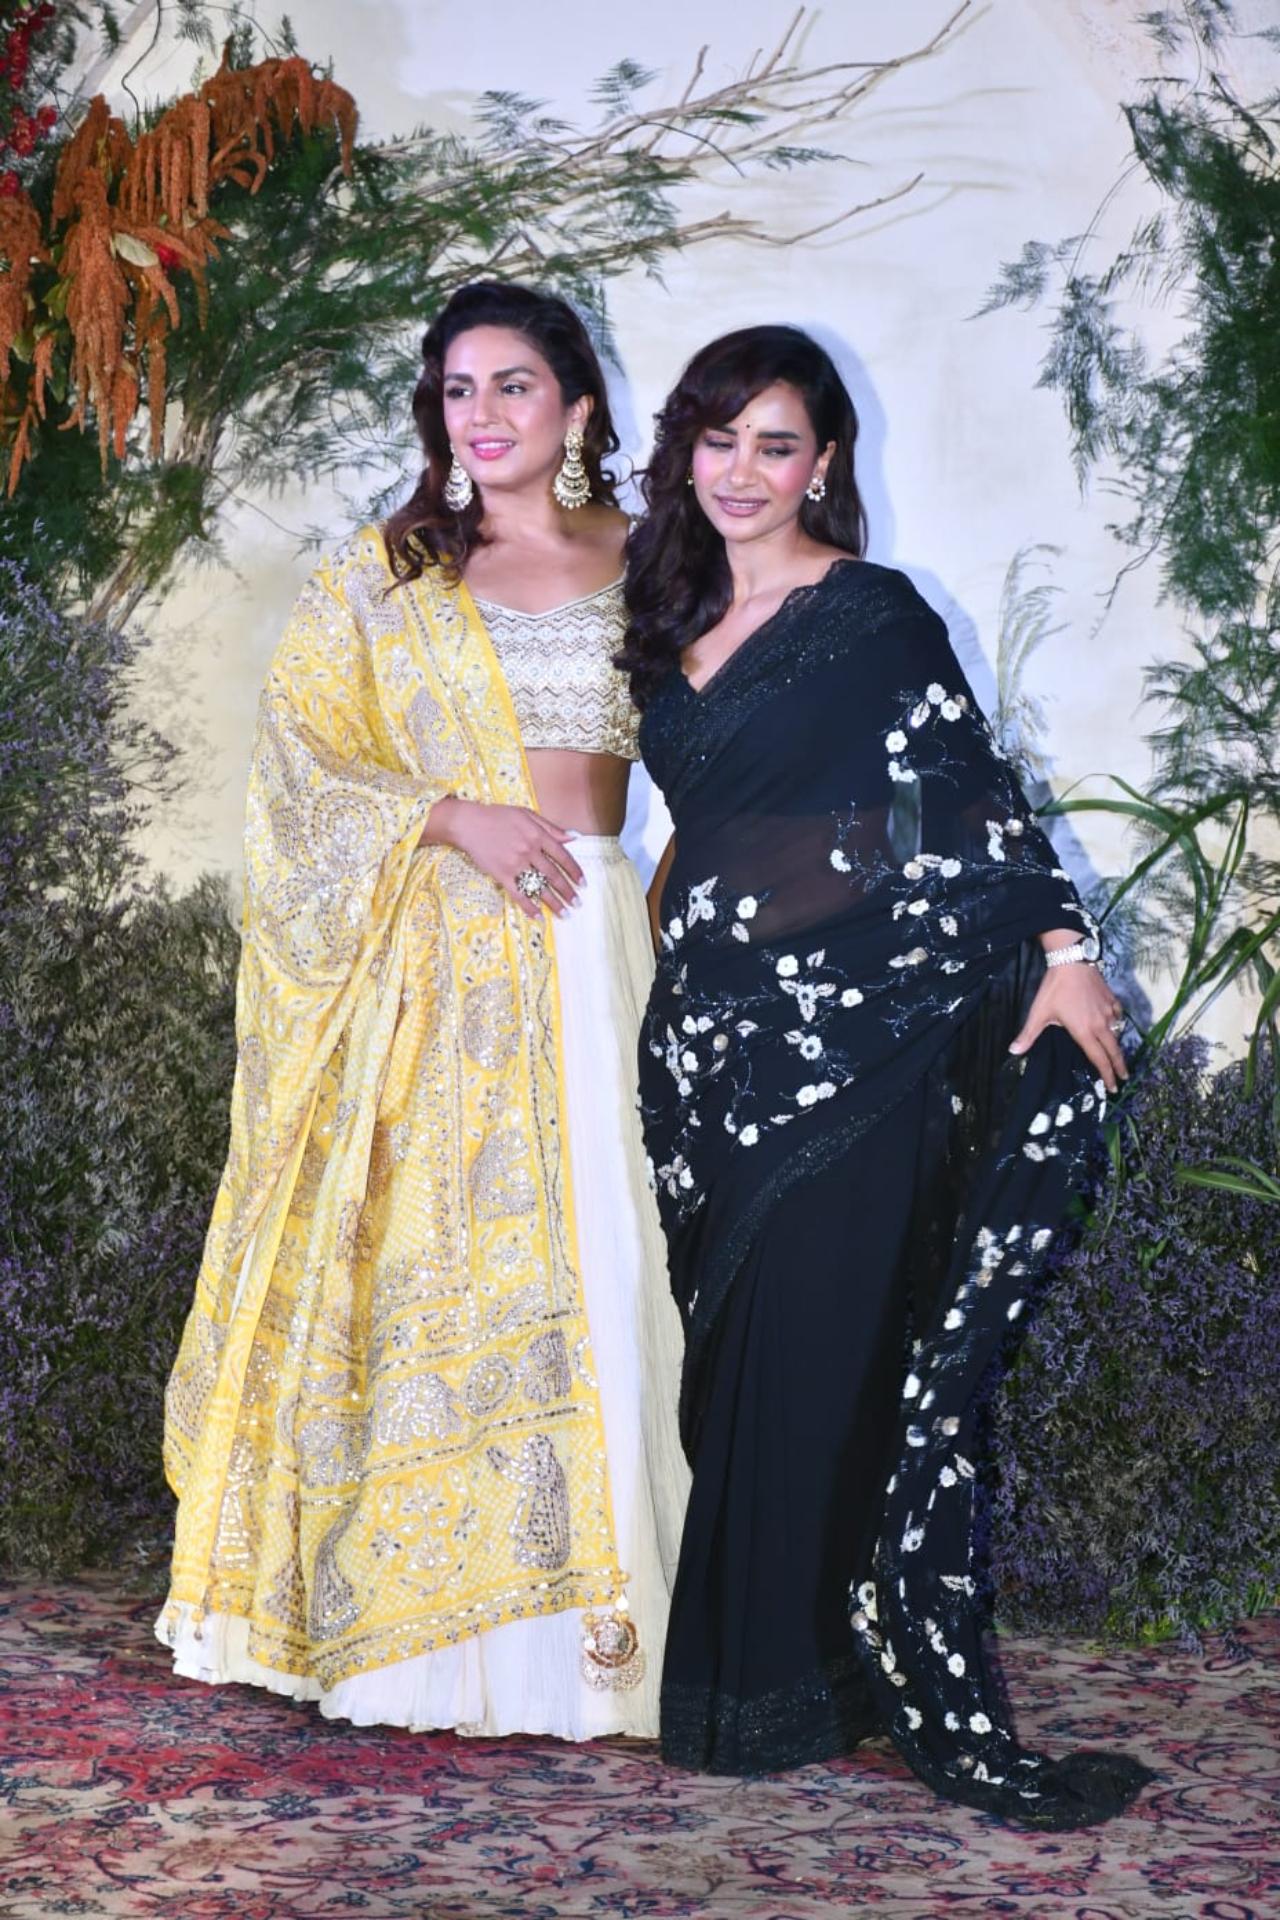 Huma Qureshi dazzled in a yellow and white lehenga while Patralekhaa opted for a black saree